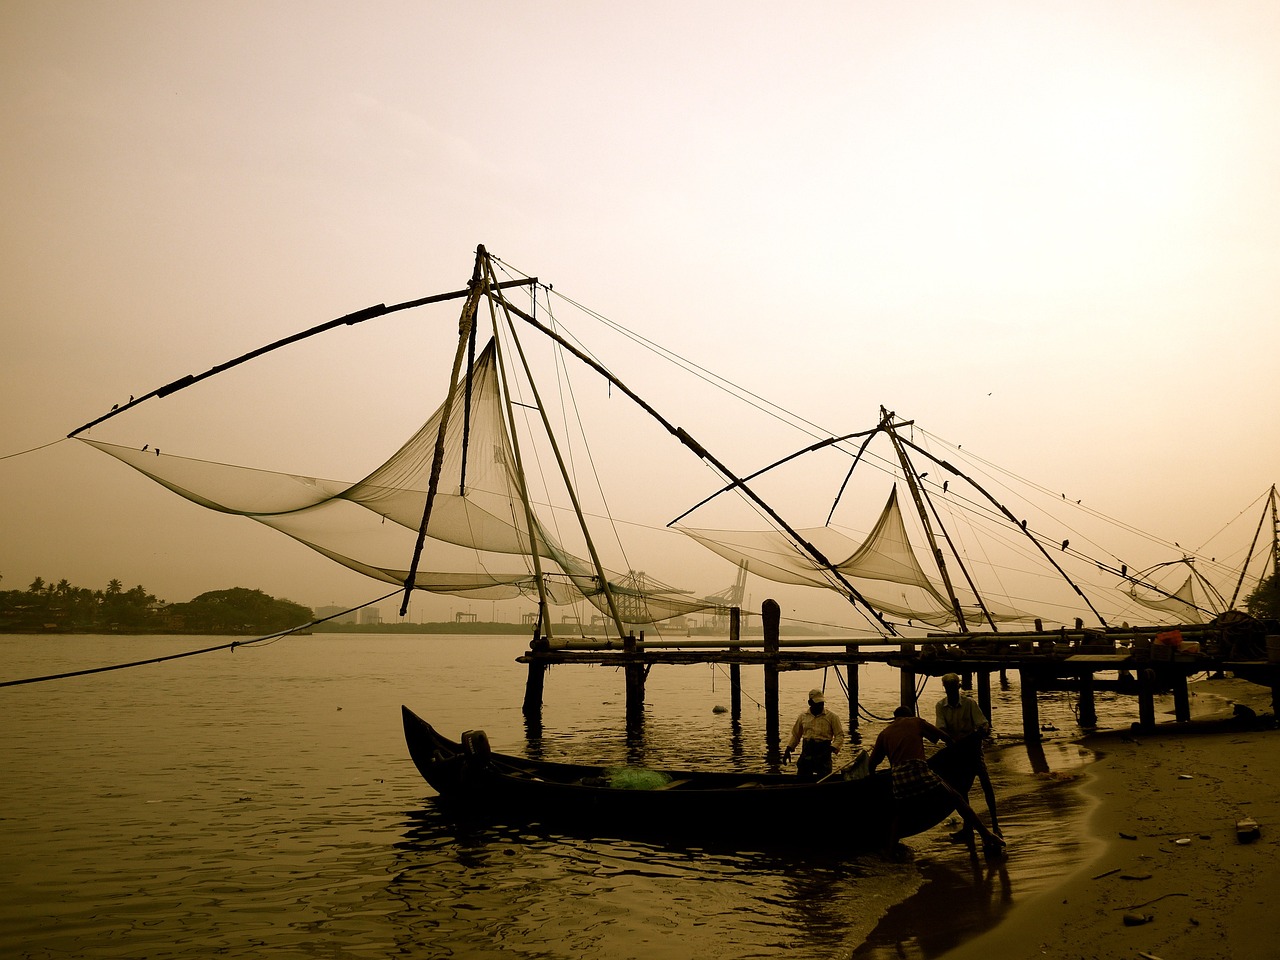 Kochi Cultural and Backwater Delights